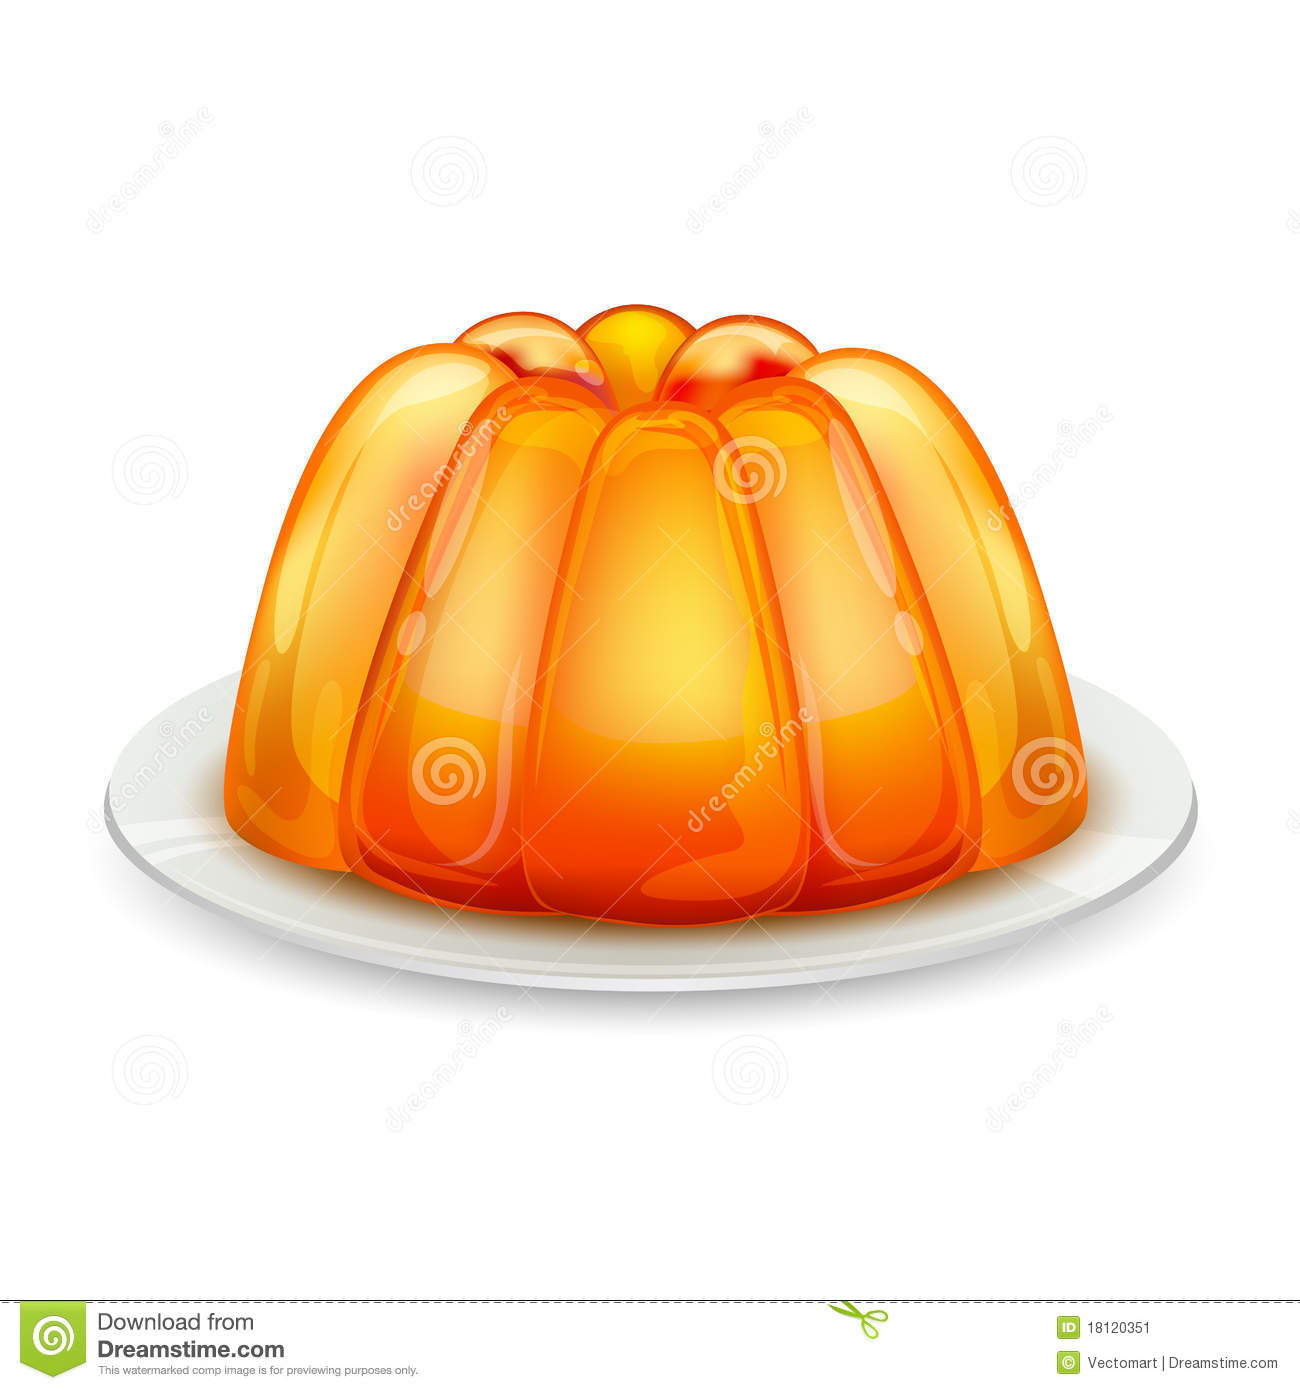 Illustration Of Jelly On Plate Against Isolated Background